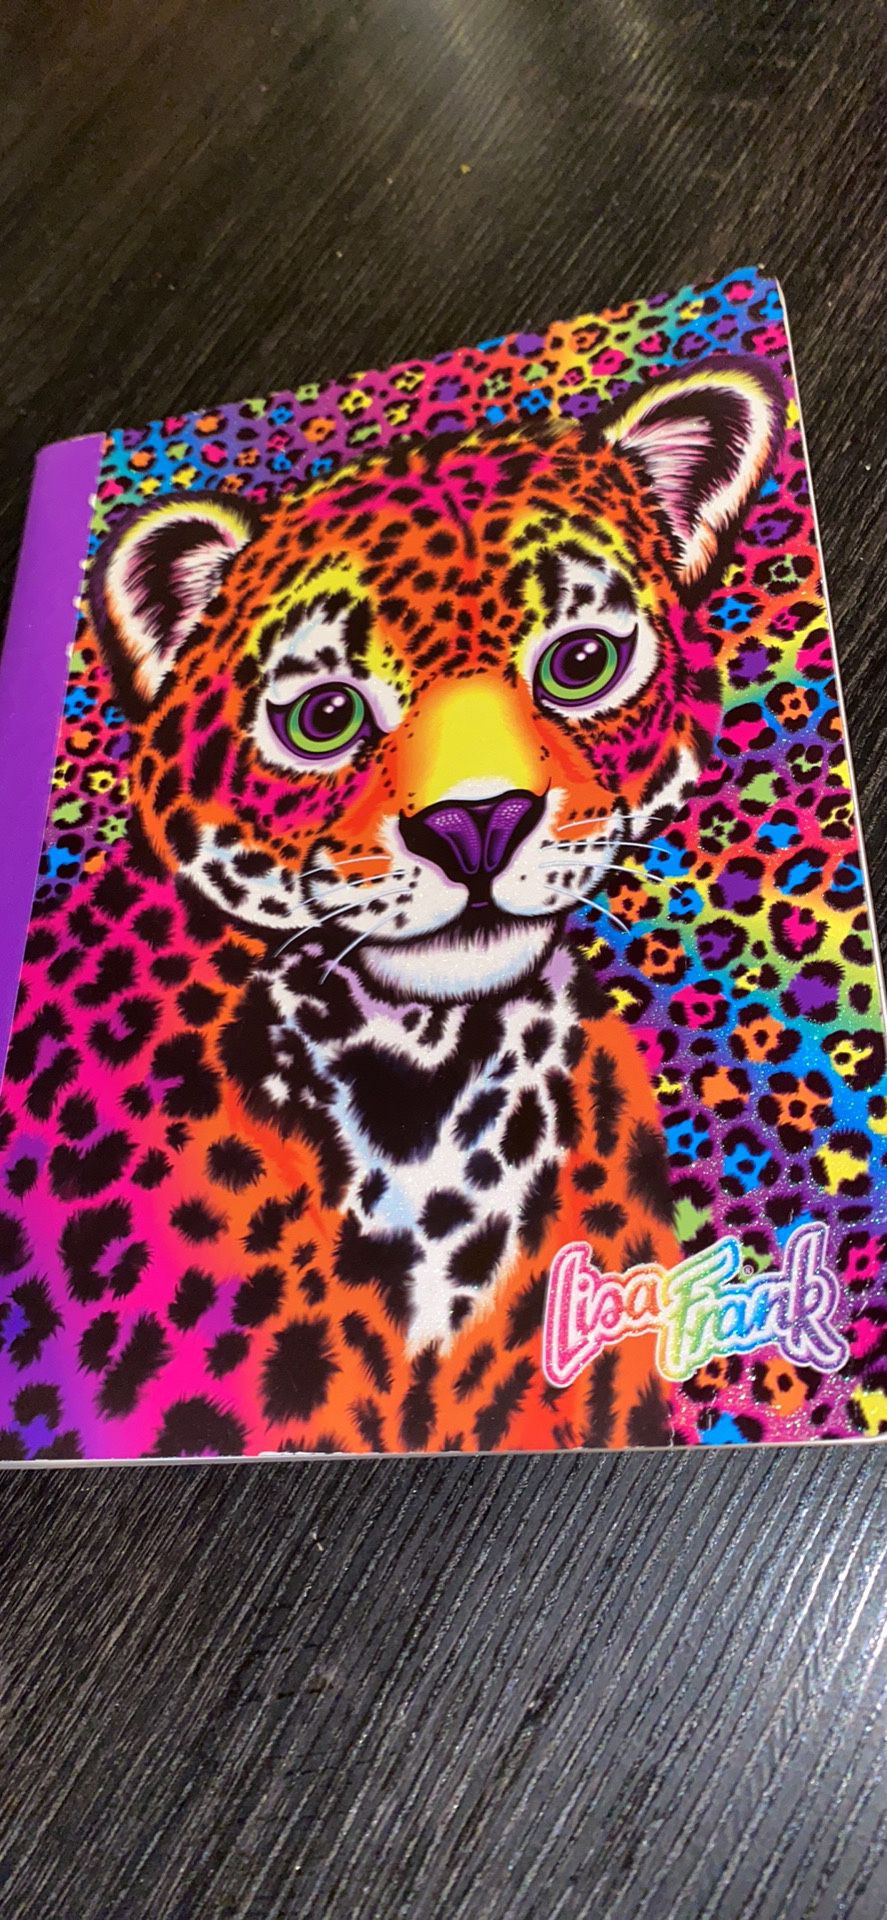 Lisa Frank Notebook for Sale in Brooklyn, NY - OfferUp